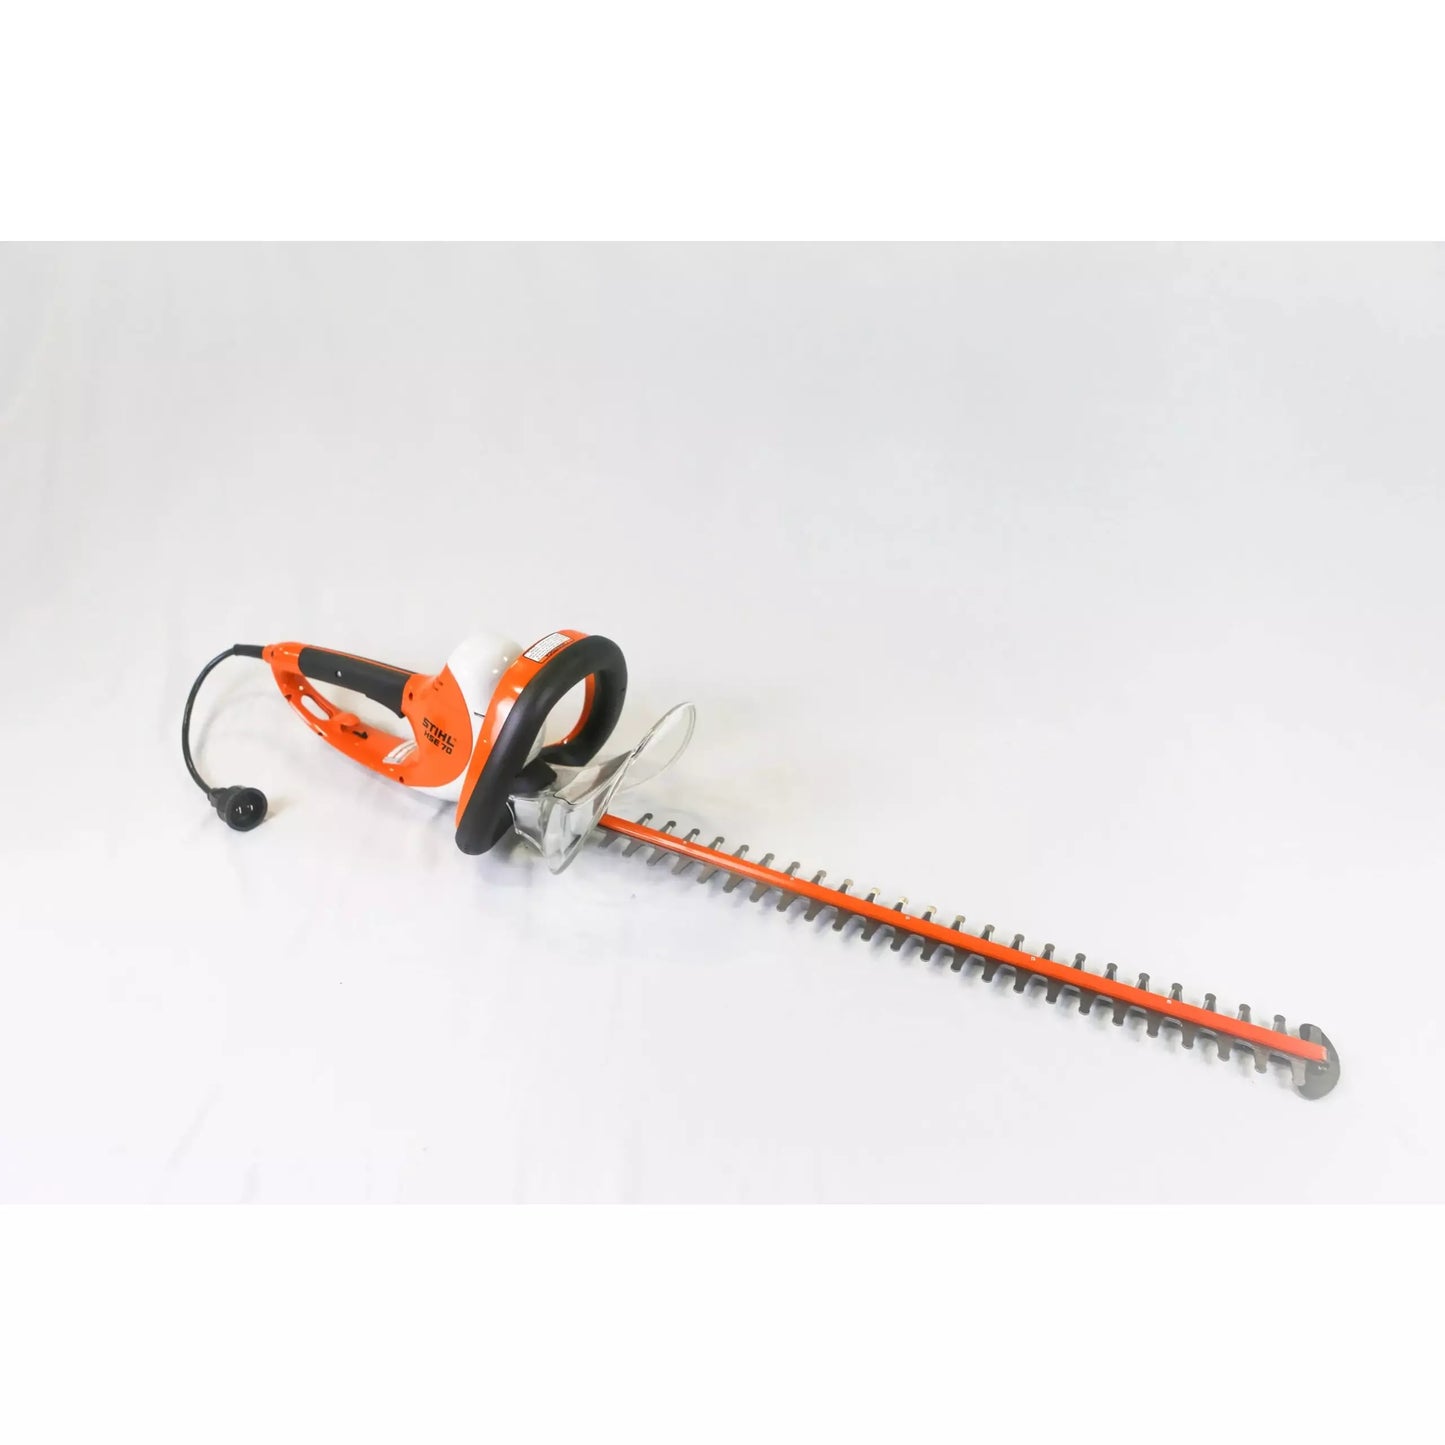 STIHL HSE 70 24 in. 120 V Electric Corded Plug In